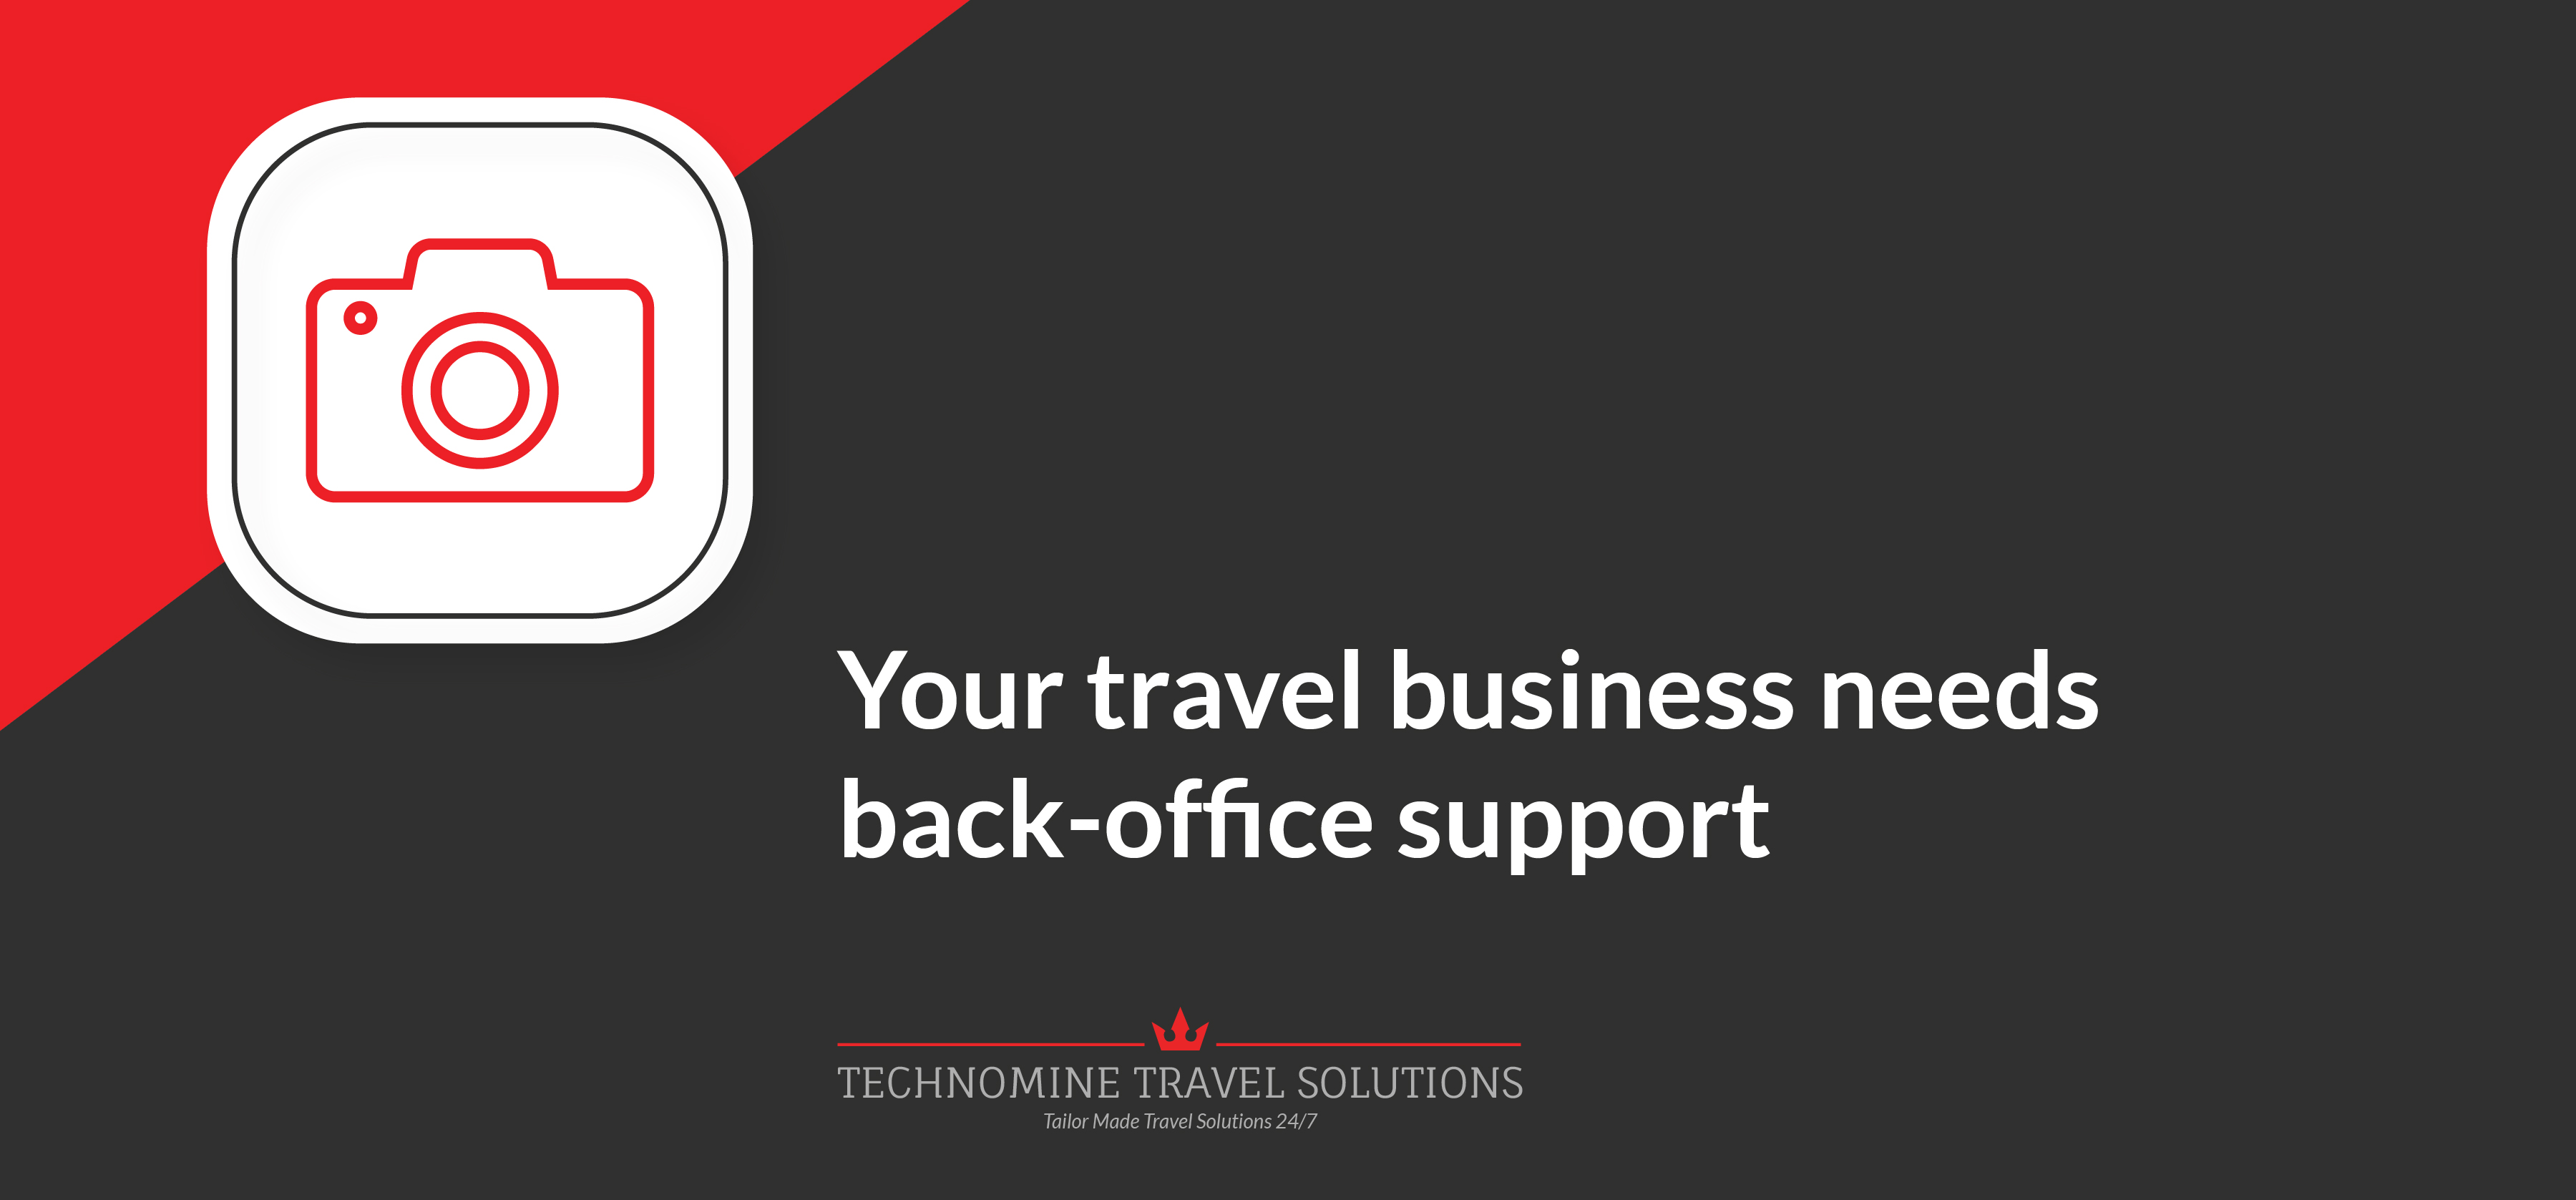 Your travel business needs back-office support